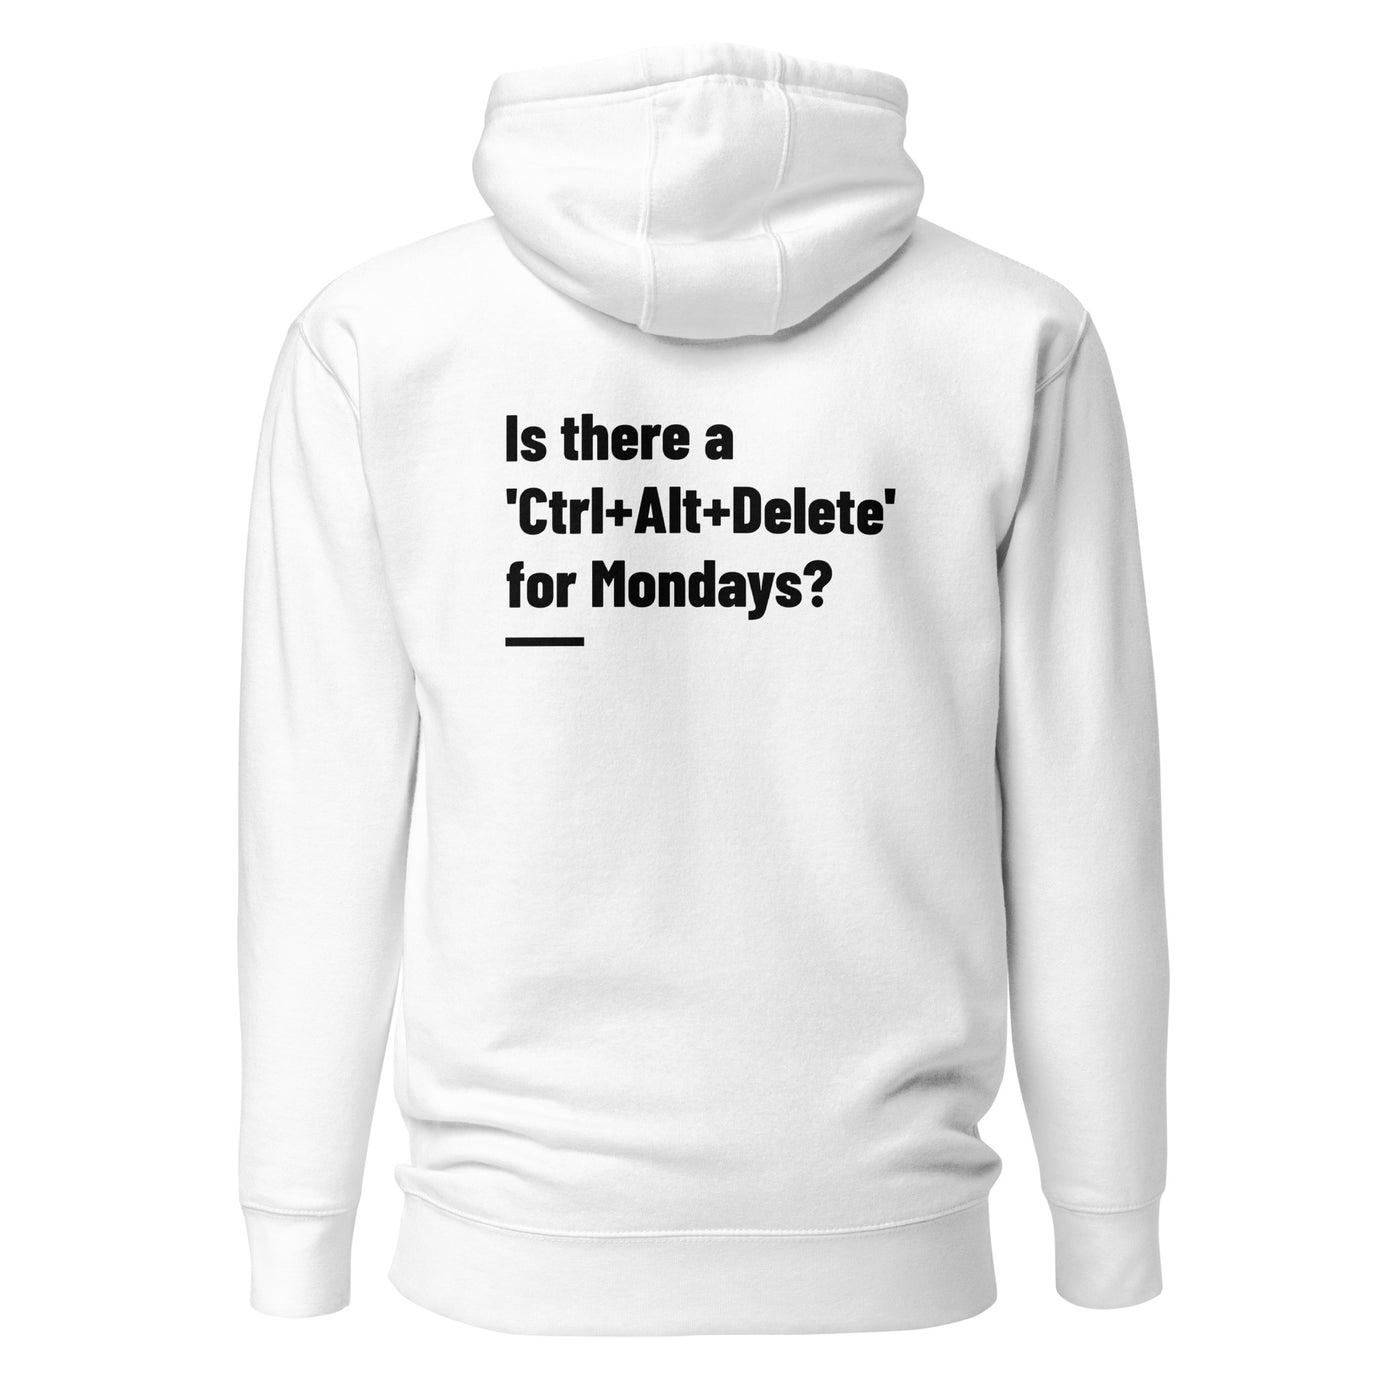 Is there a 'Ctrl+Alt+Delete' for Mondays? - Unisex Hoodie